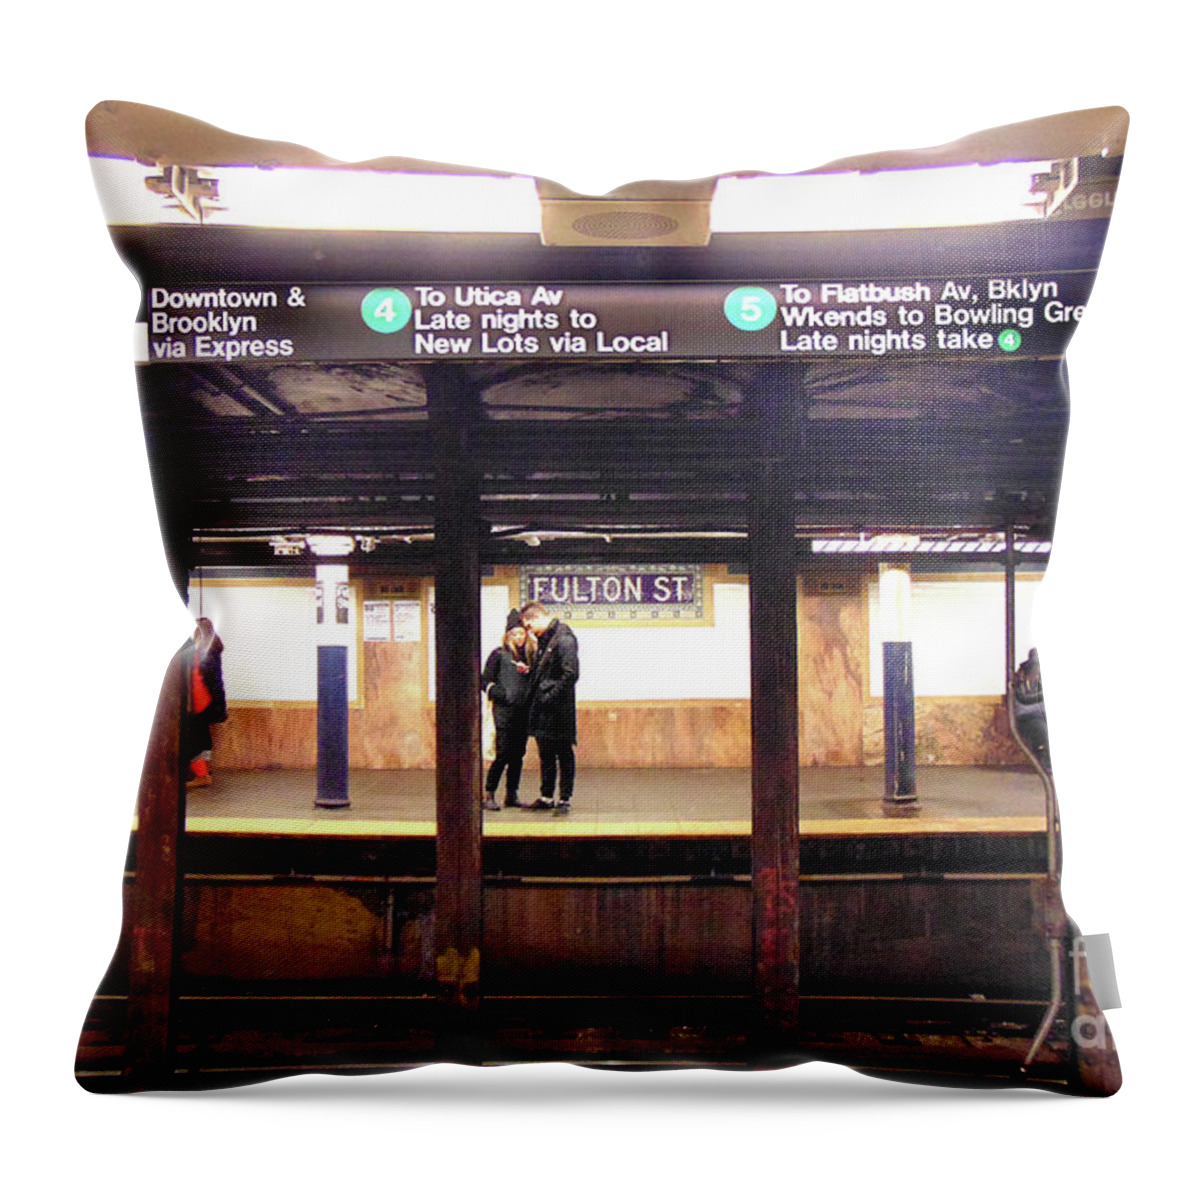  Throw Pillow featuring the digital art New York Subway by Darcy Dietrich